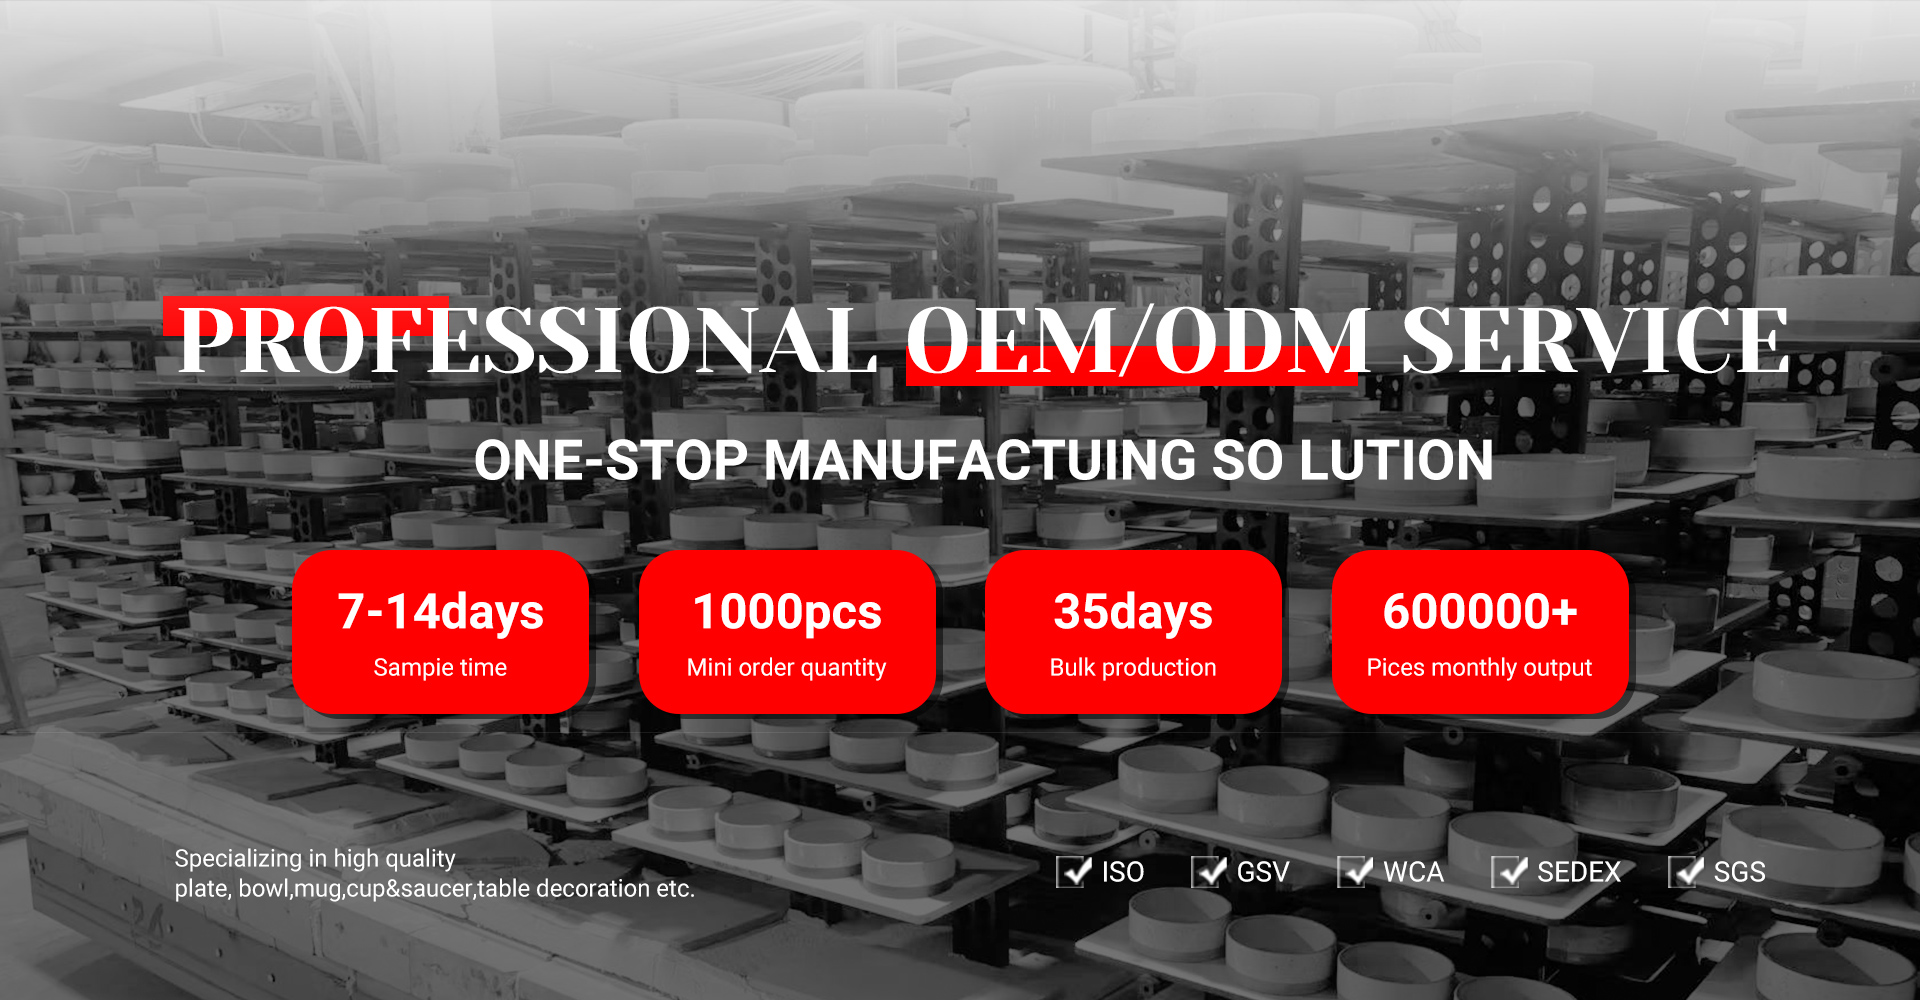 One-Stop Manufactuing Solution